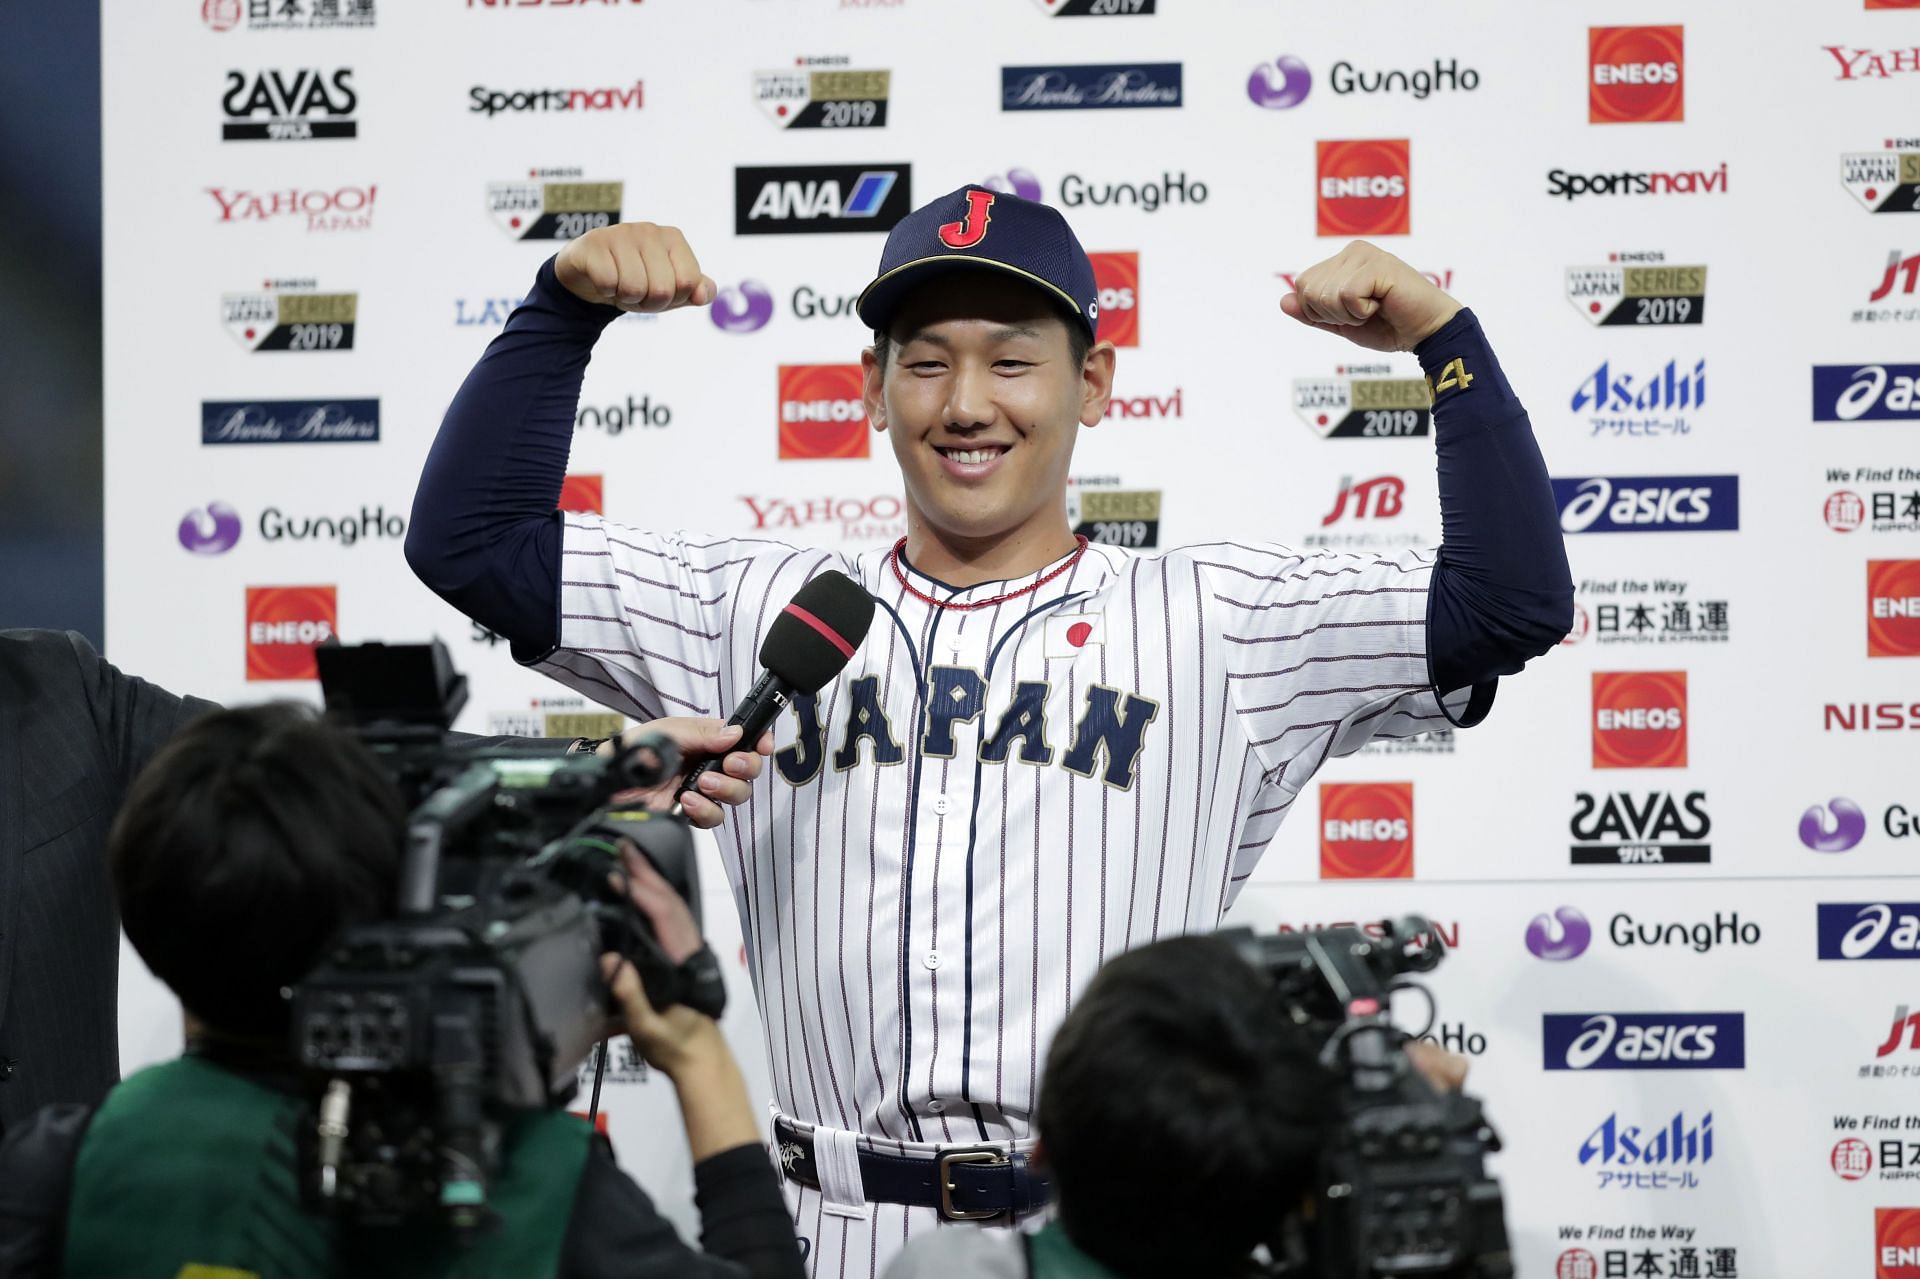 Outfielder Masataka Yoshida poses during the interview after a game between Japan and Mexico at Kyocera Dome, Osaka.